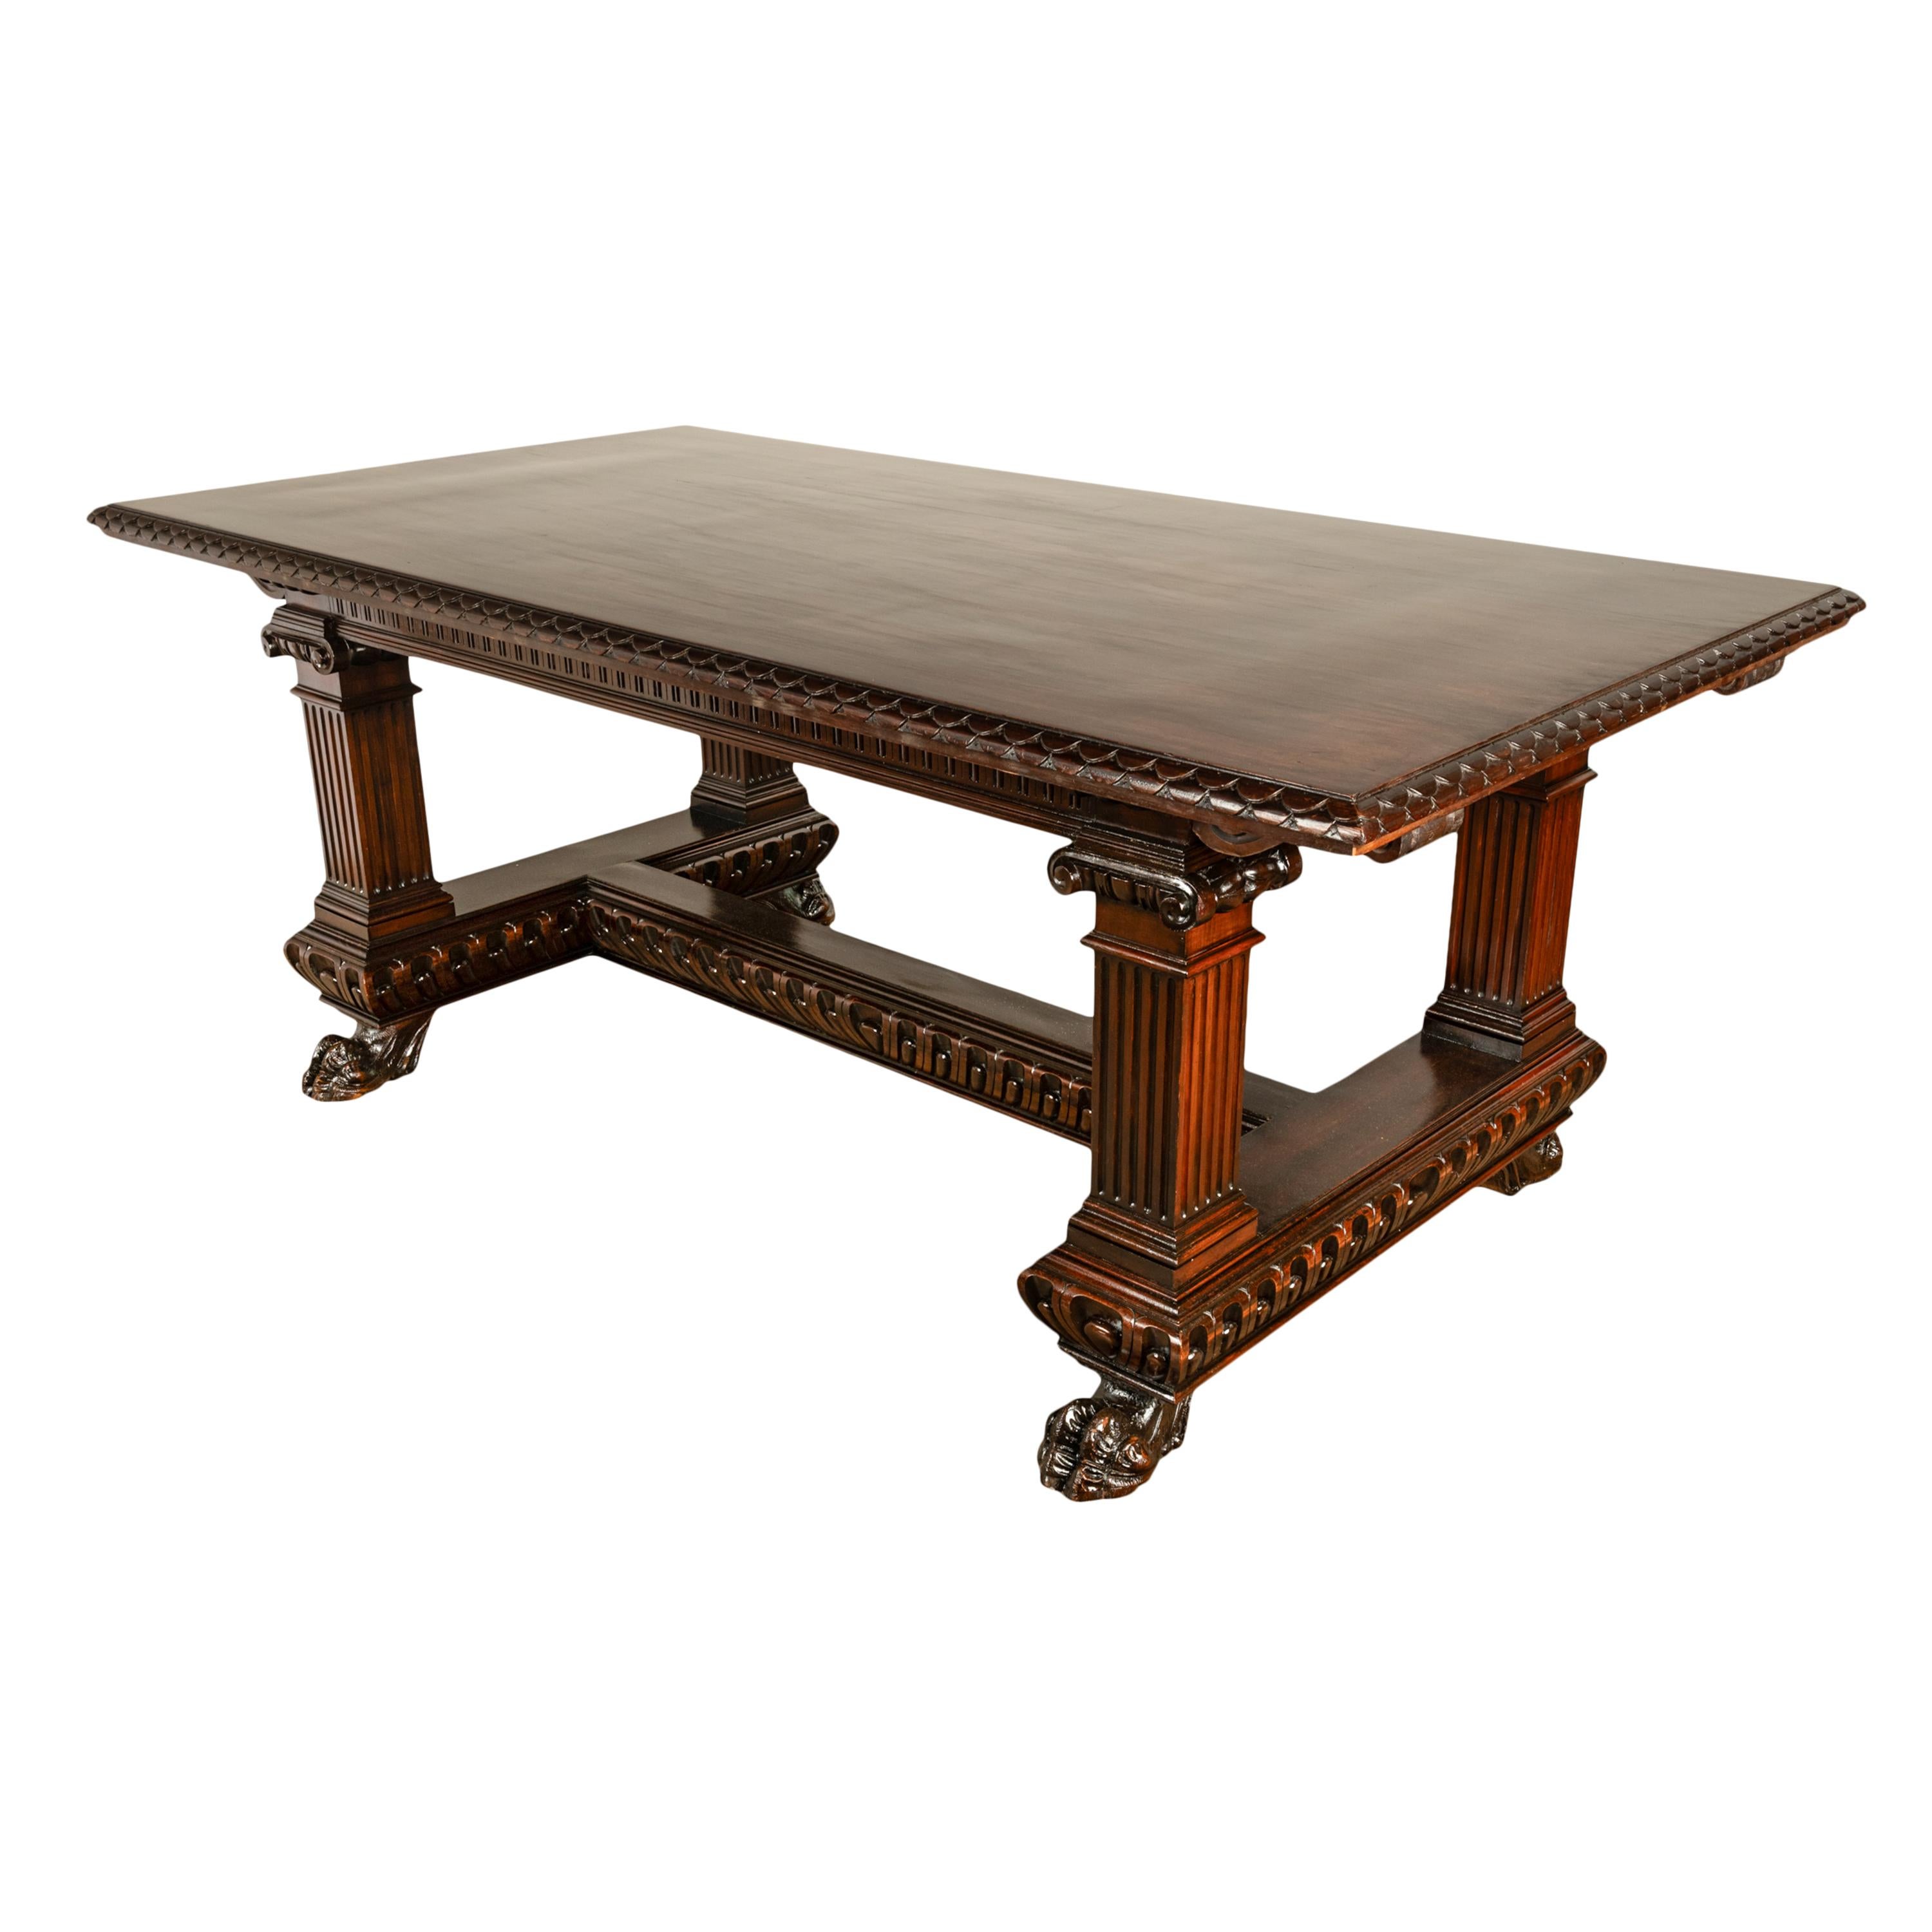 A very elegant Italian carved walnut Renaissance Revival library dining table, circa 1880.
The table top edge having two bands of carved gadrooned decoration, underneath the top there are two corbel carved brackets at each corner of the, the table